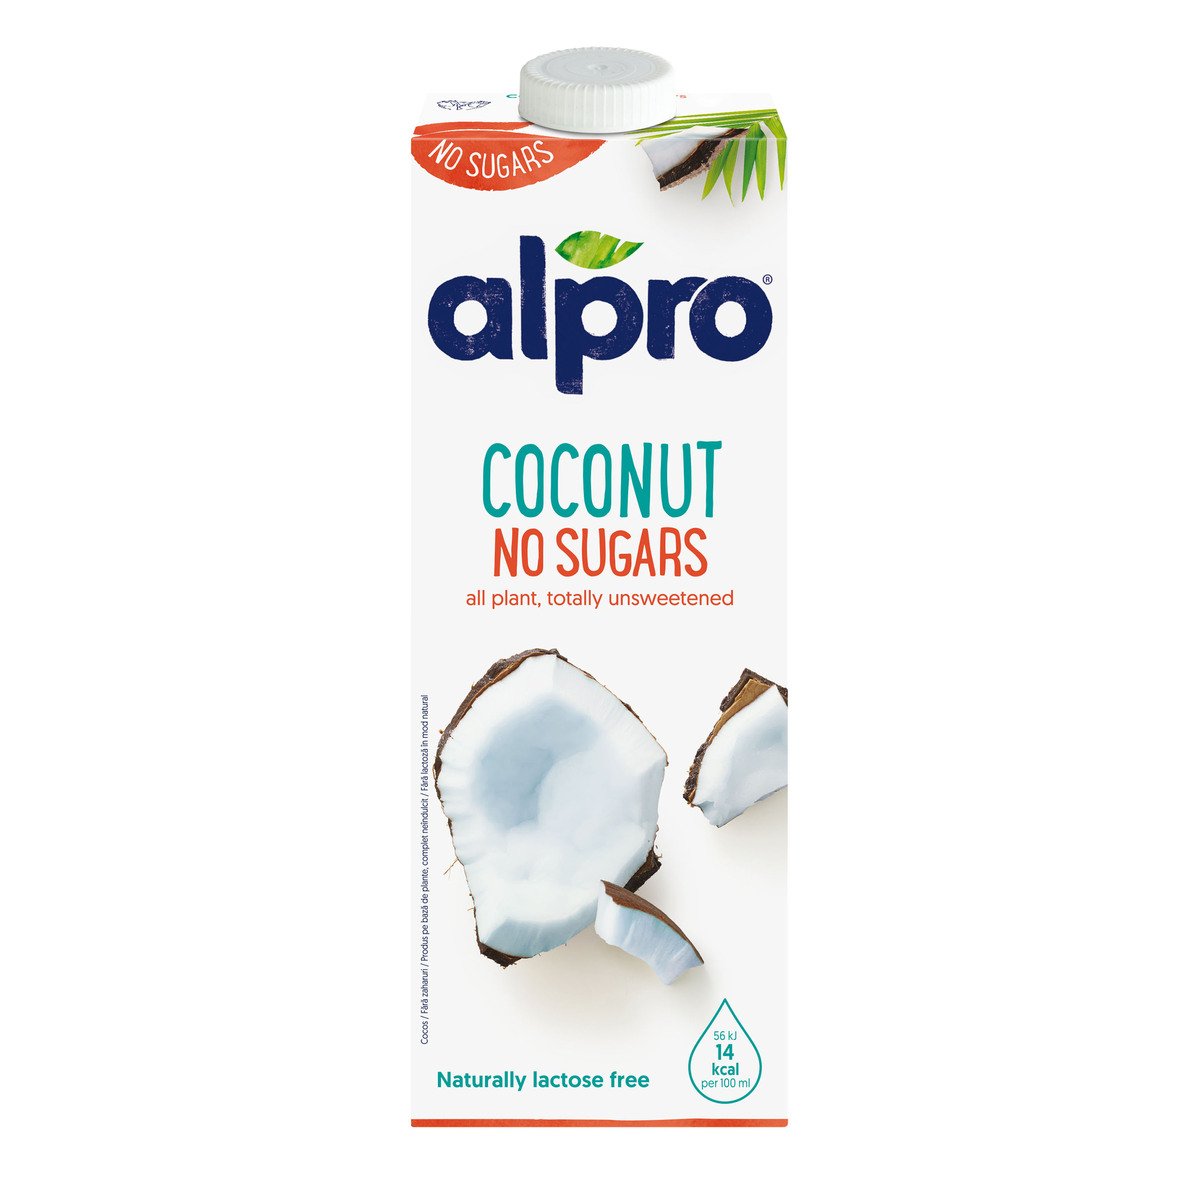 Alpro Coconut Drink Unsweetened 1 Litre